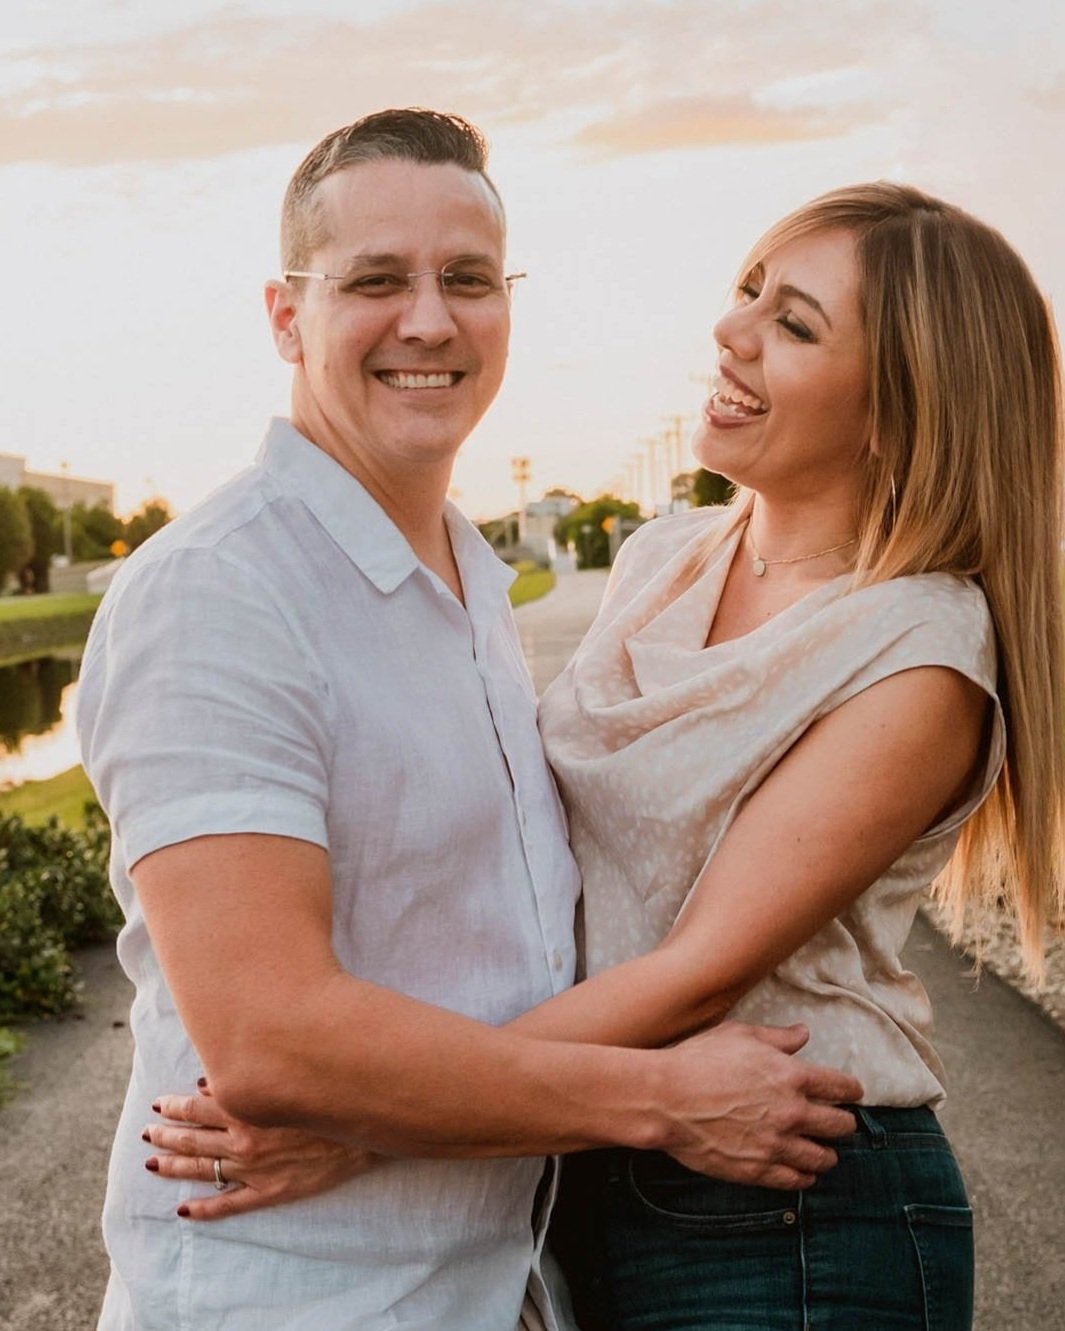 fiance smiles at fiancee during sunset hour engagement photos taken by Sharma Shari Photography